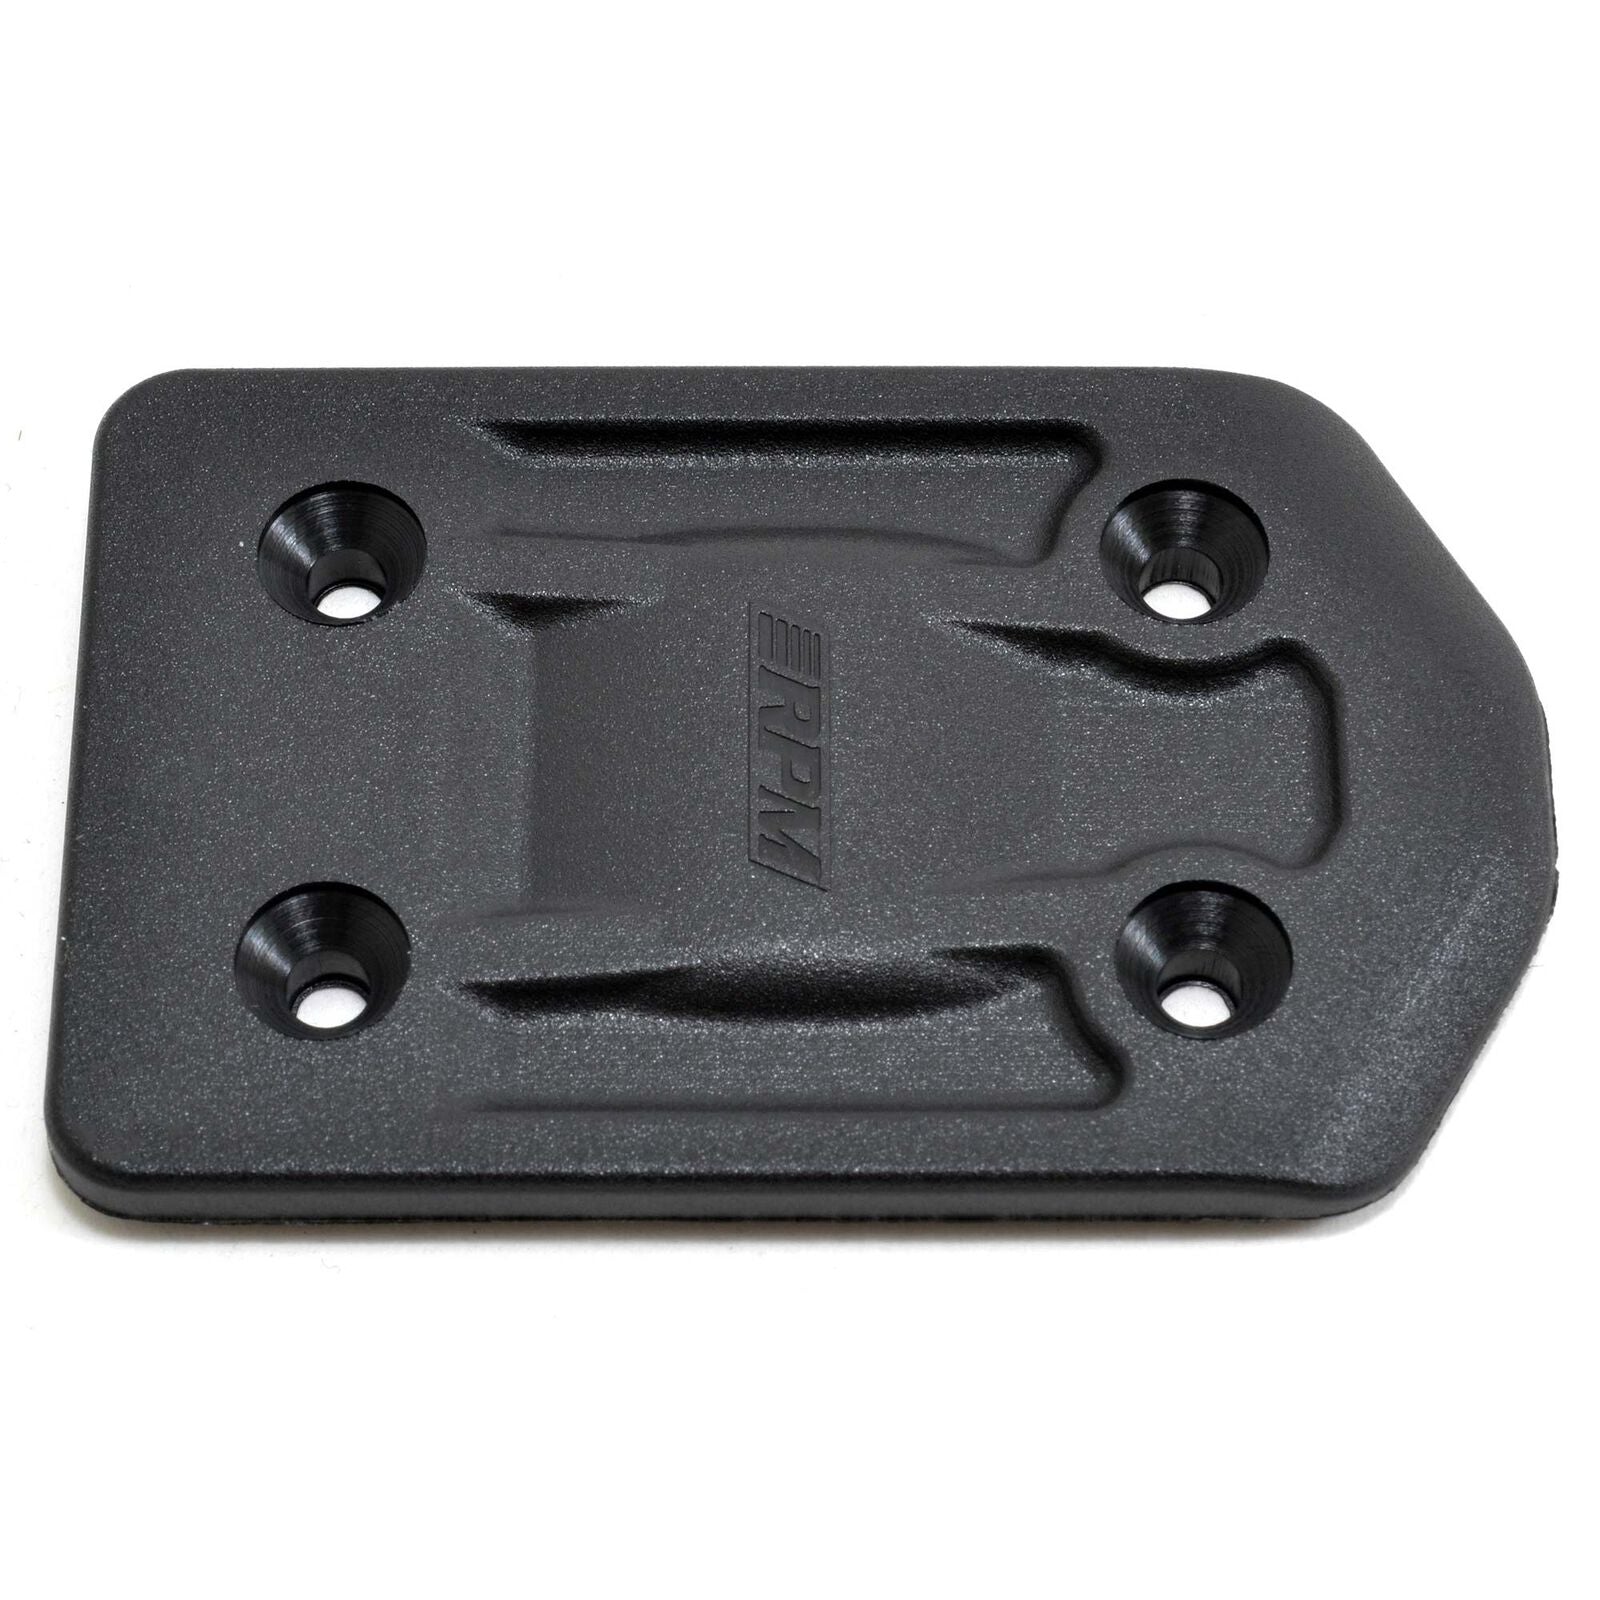 RPM 81332 Rear Skid Plate: Most ARRMA 6S Vehicles